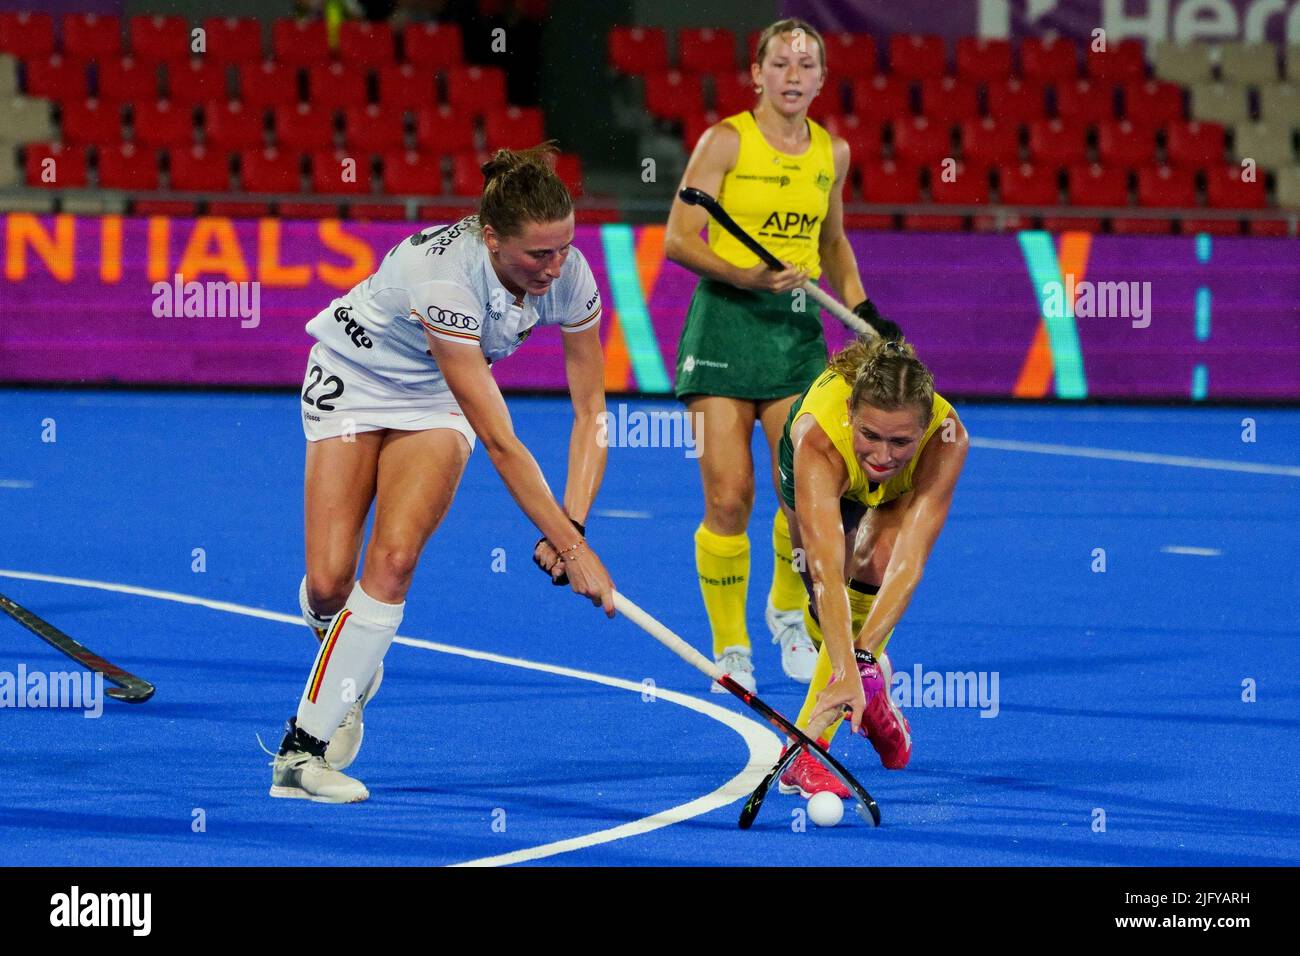 Terrassa, Spain, 05 July 2022, Belgium's Stephanie Vanden Borre pictured in action during a hockey match between Belgian Red Panthers and Australia, Tuesday 05 July 2022 in Terrassa, Spain, game 2/3 in pool D of the group stage of the 2022 Women's FIH world cup. BELGA PHOTO JOMA GARCIA Stock Photo